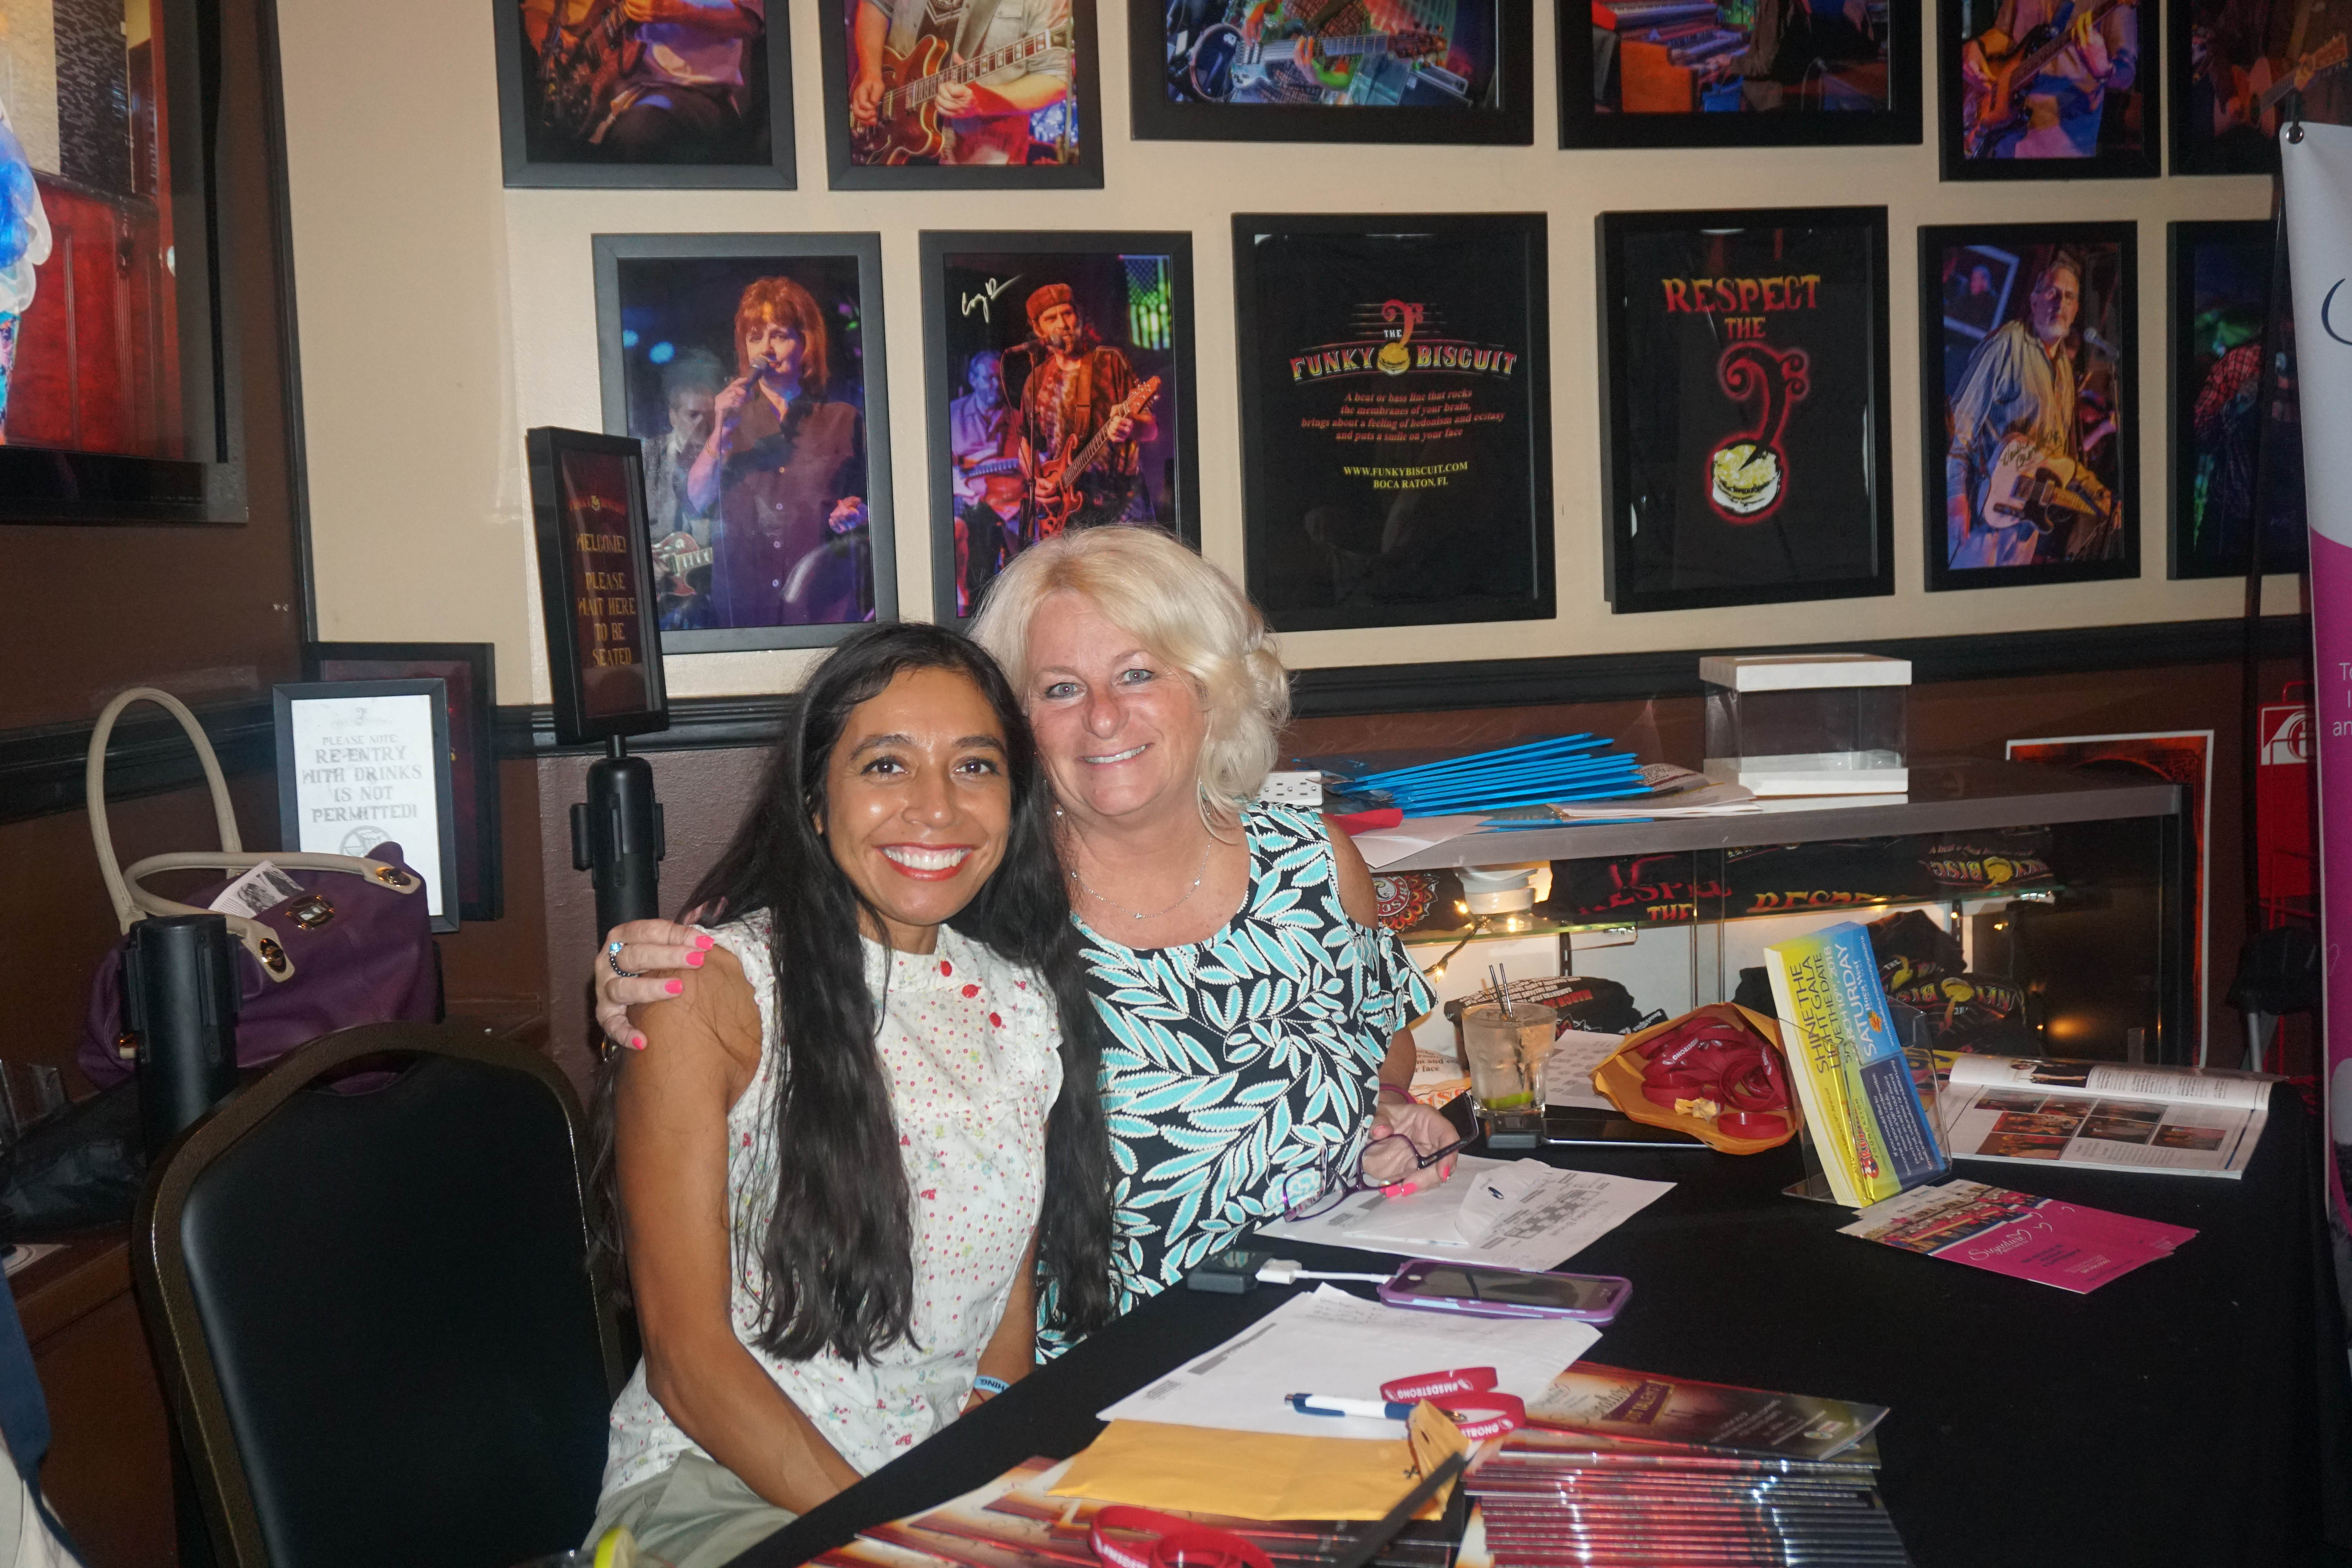 SREC staffers Rachel Morales and Heidi Willson Boost Donations at The Funky Biscuit "Signature's Got Talent Show."